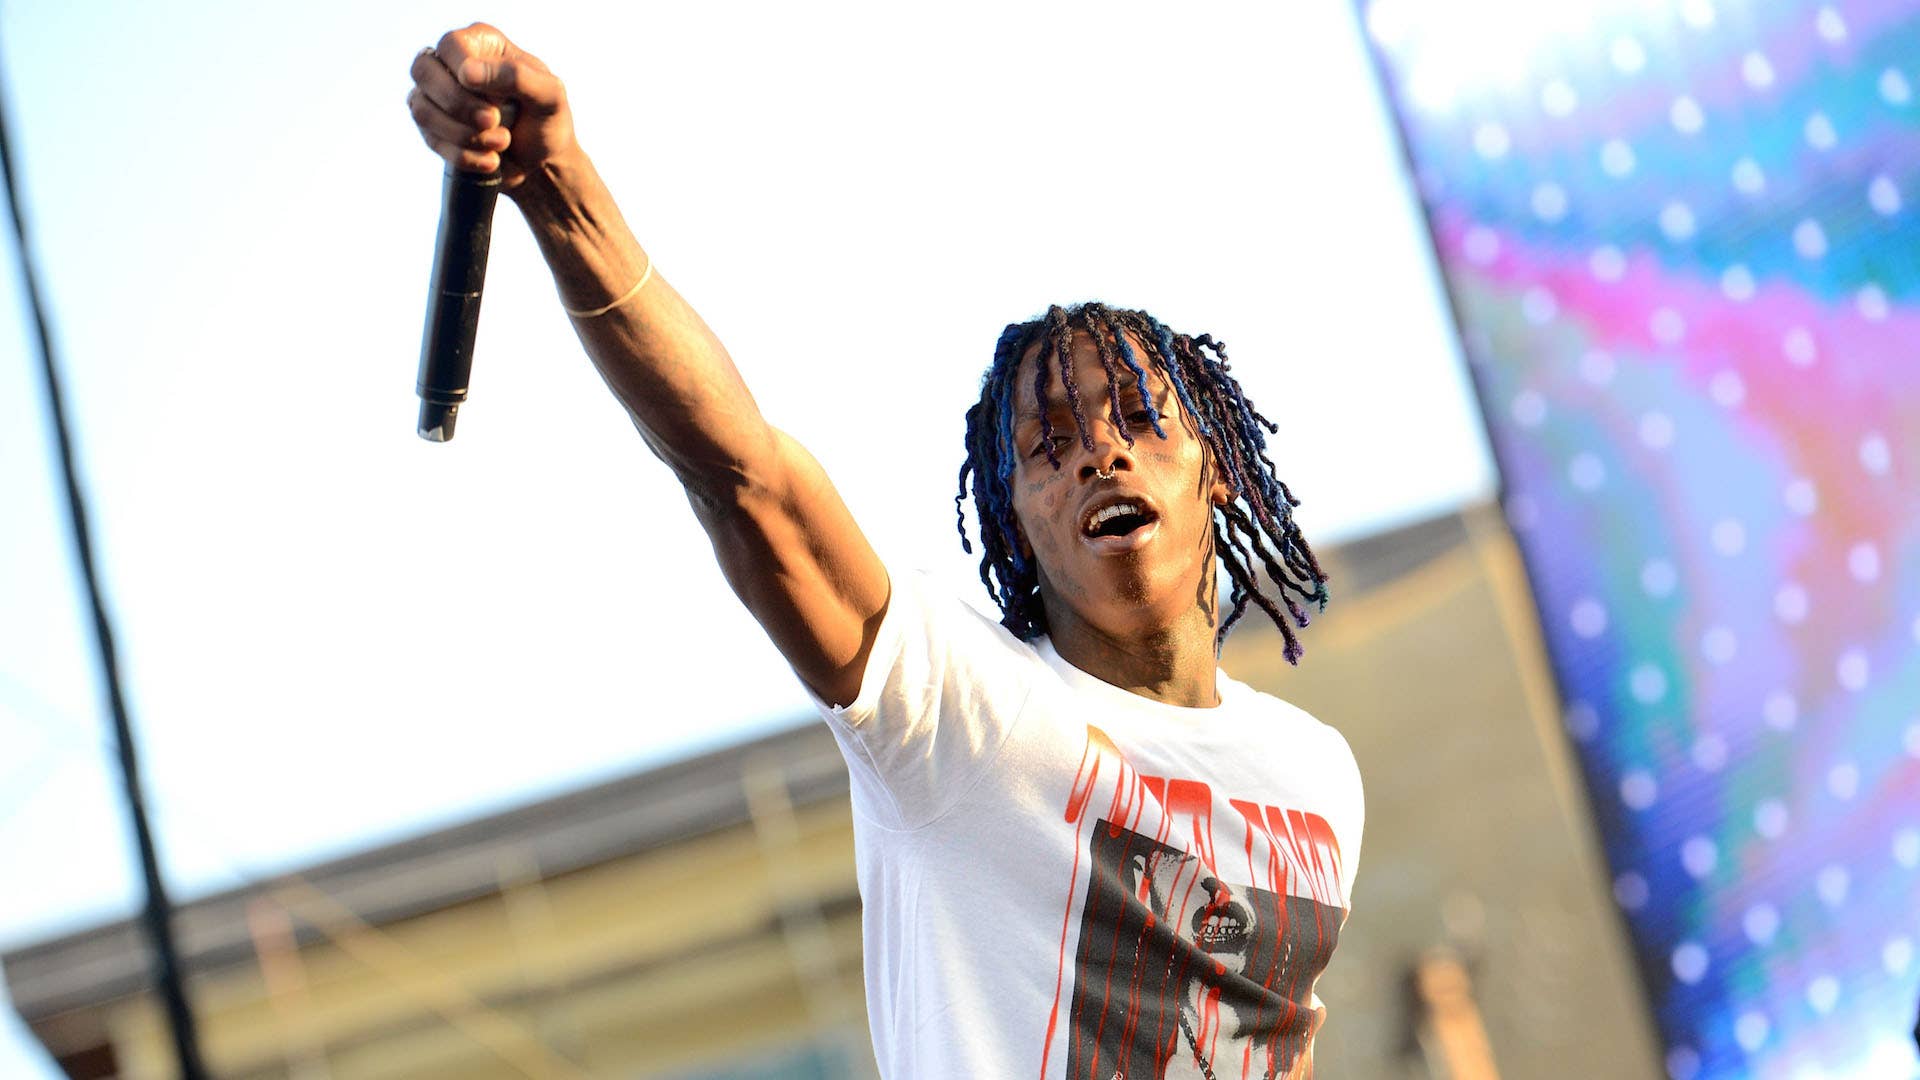 Rapper Famous Dex performs onstage during the Day N Night Festival